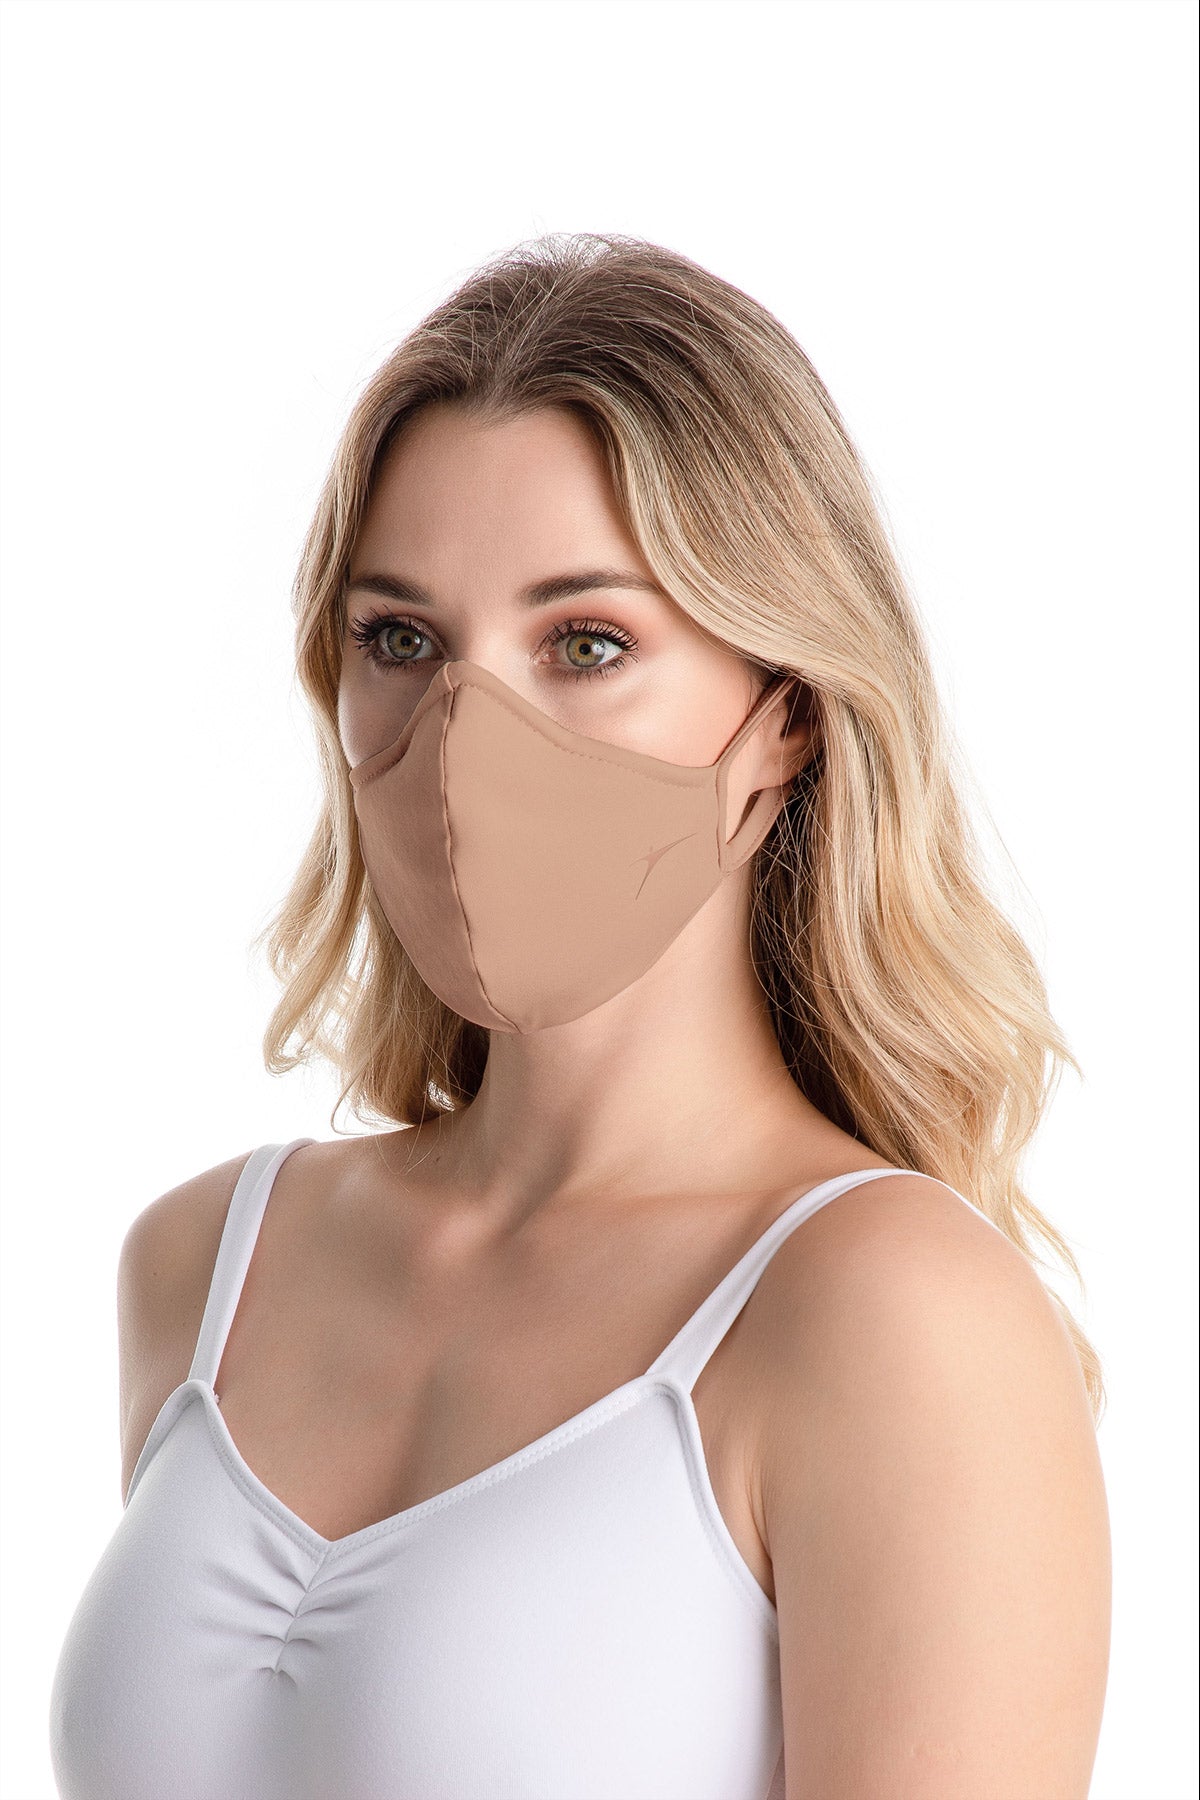 Adult Unisex Fitted Face Mask With Earloops - SD1662